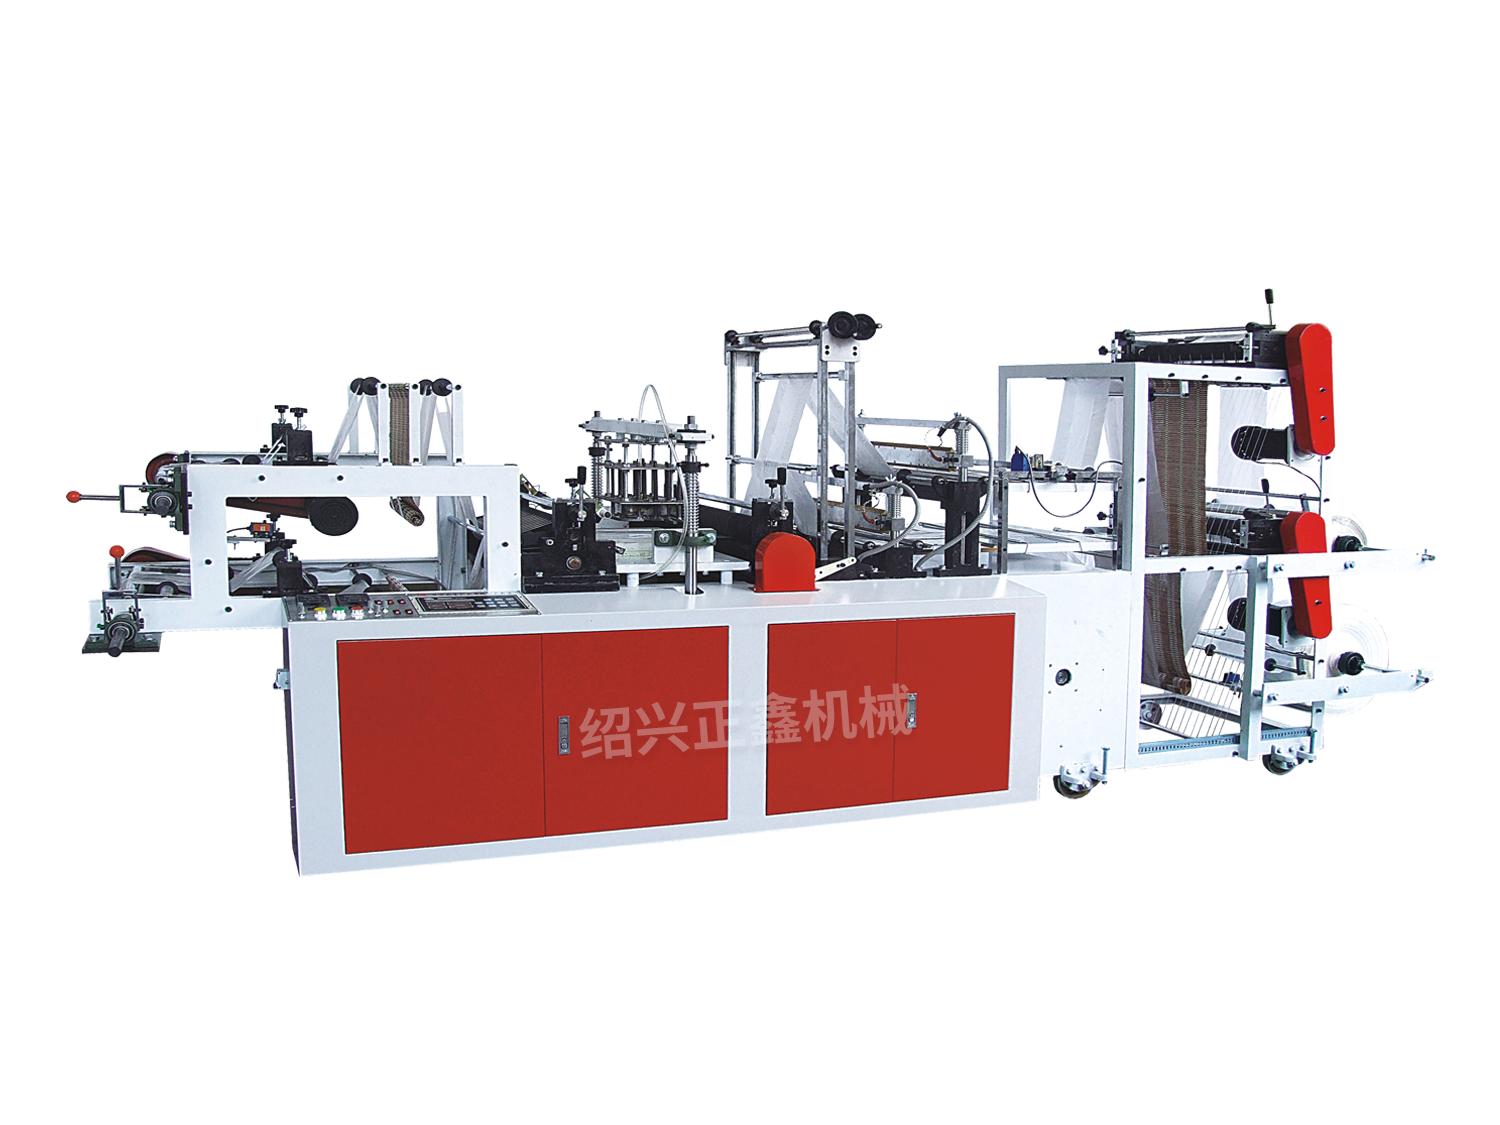 Double-deck Rolling Flat and T-shirt Bag Making Machine: How Does it Transform Plastic Bag Manufacturing?